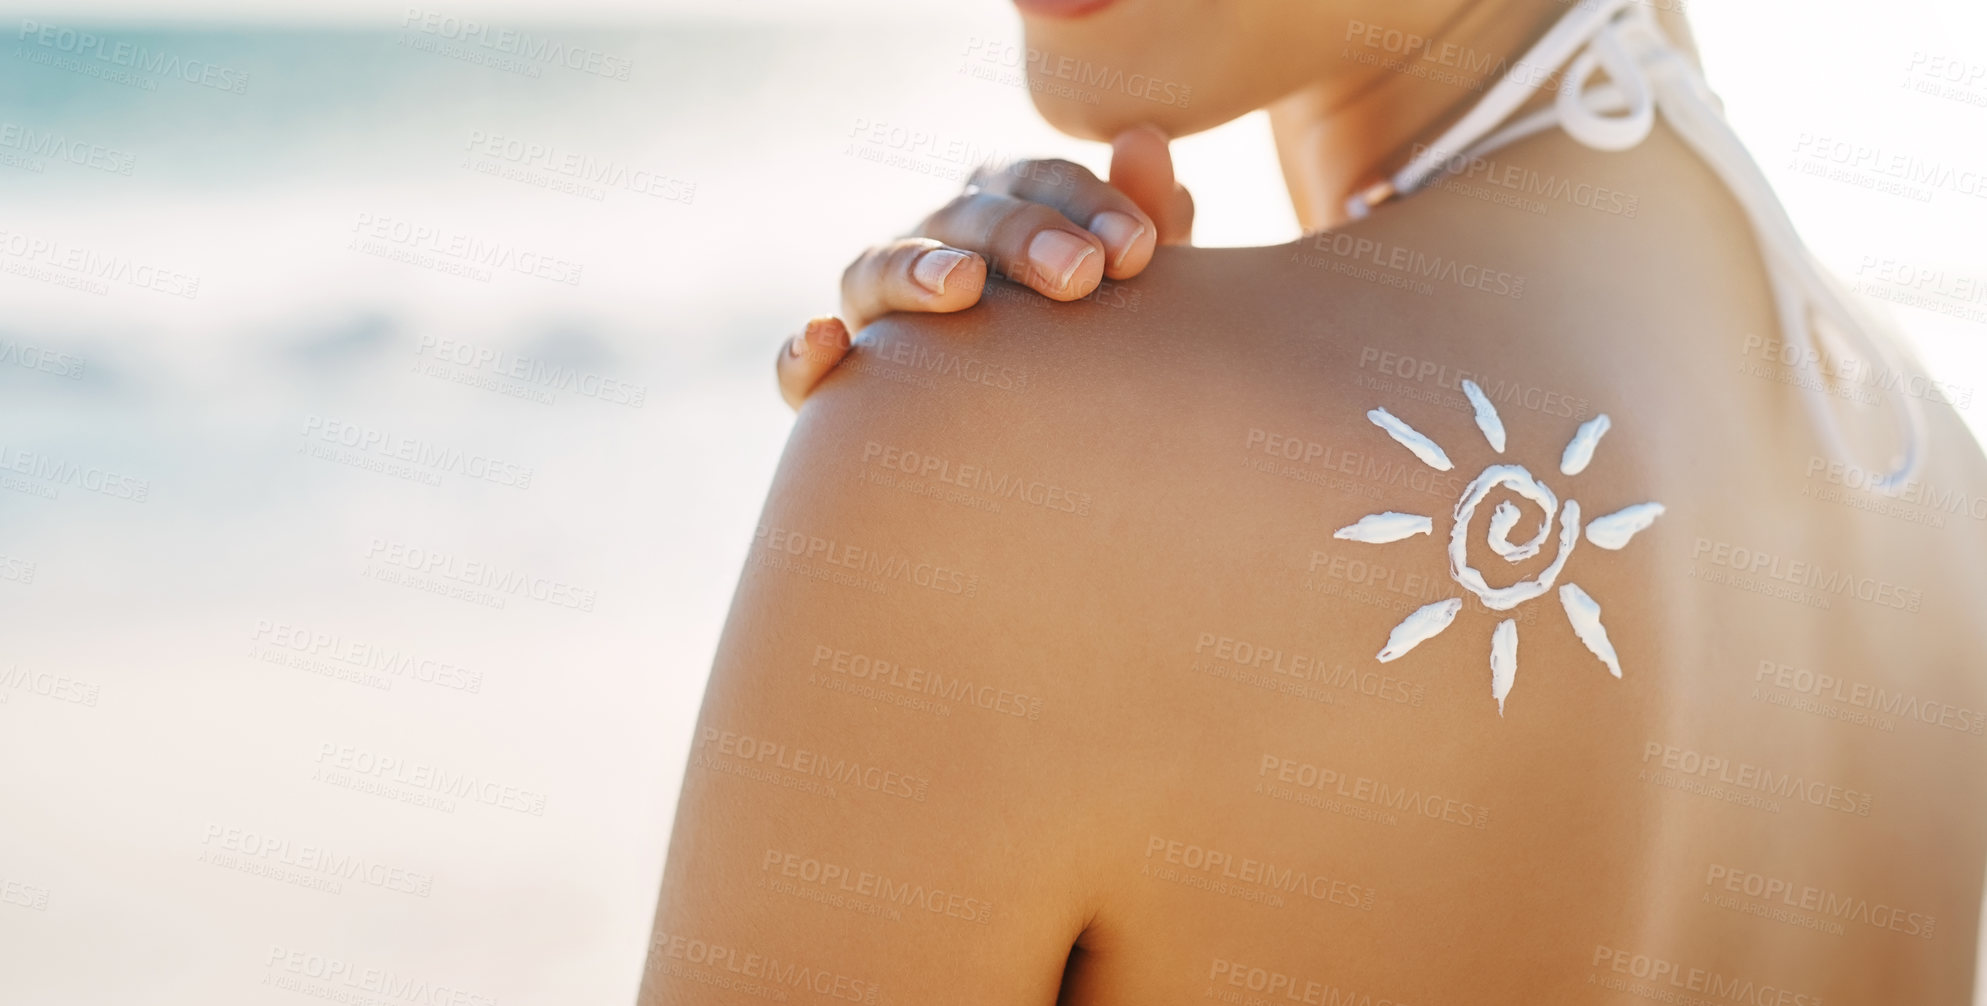 Buy stock photo Cropped shot of a young woman posing with suntan lotion on her shoulder